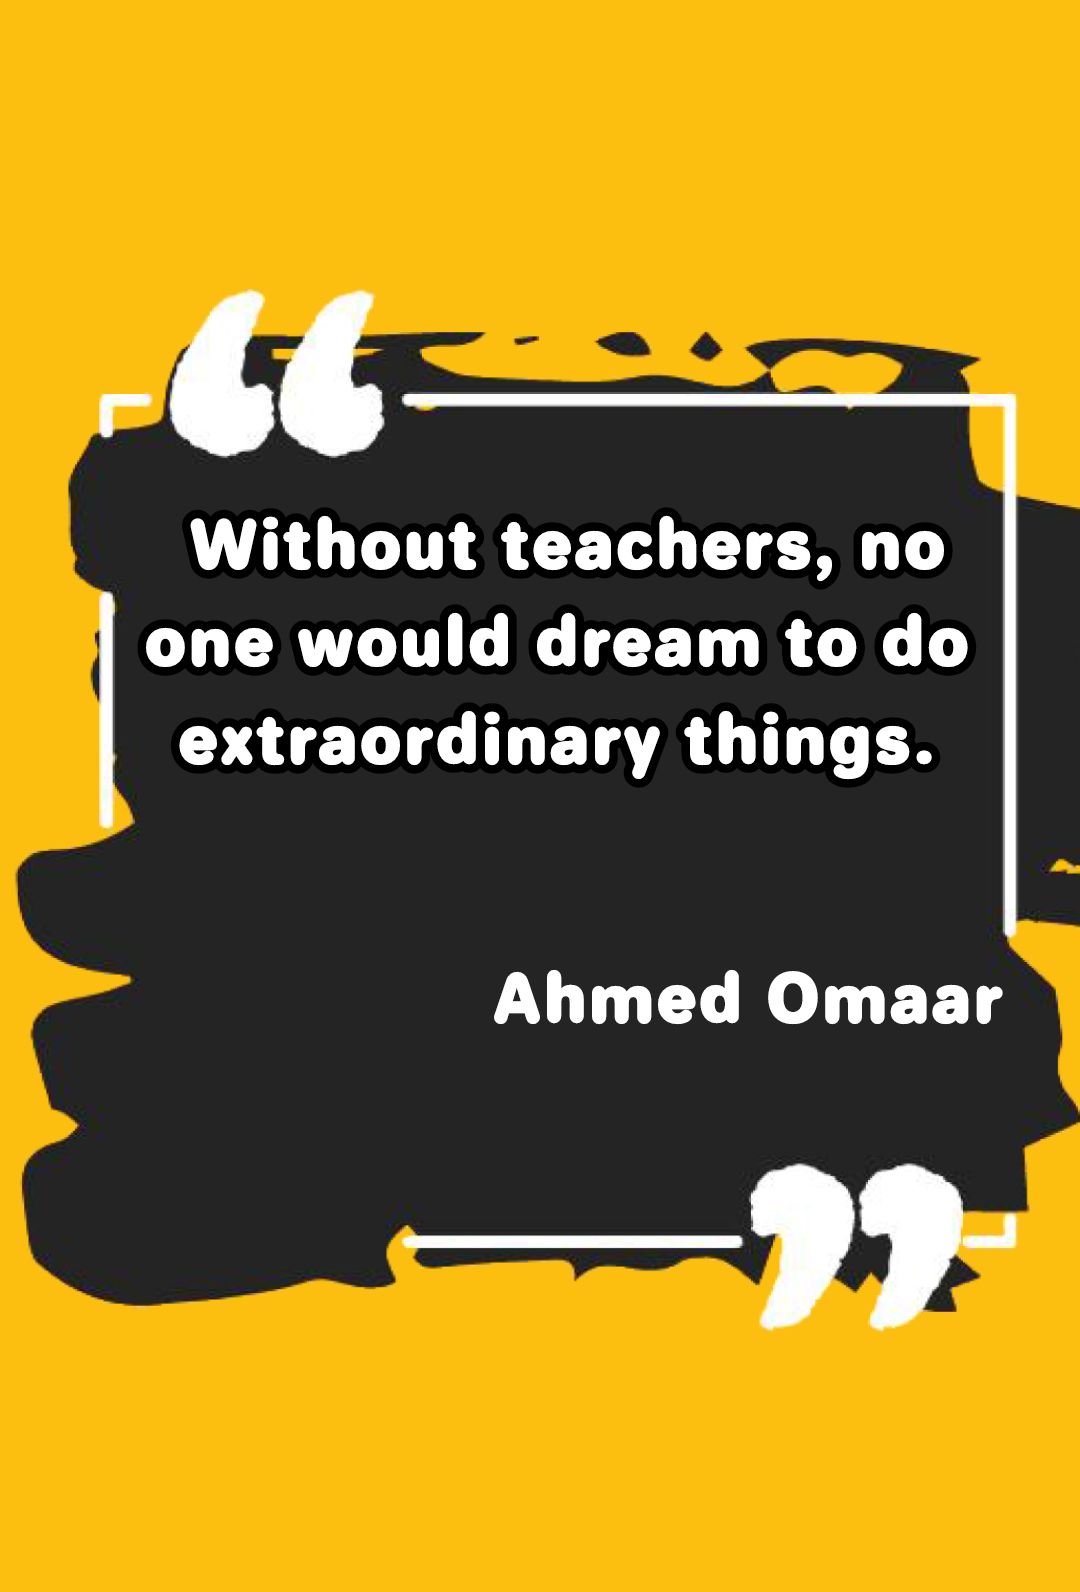 Ahmed Omaar Quotes - Motivational Quotes